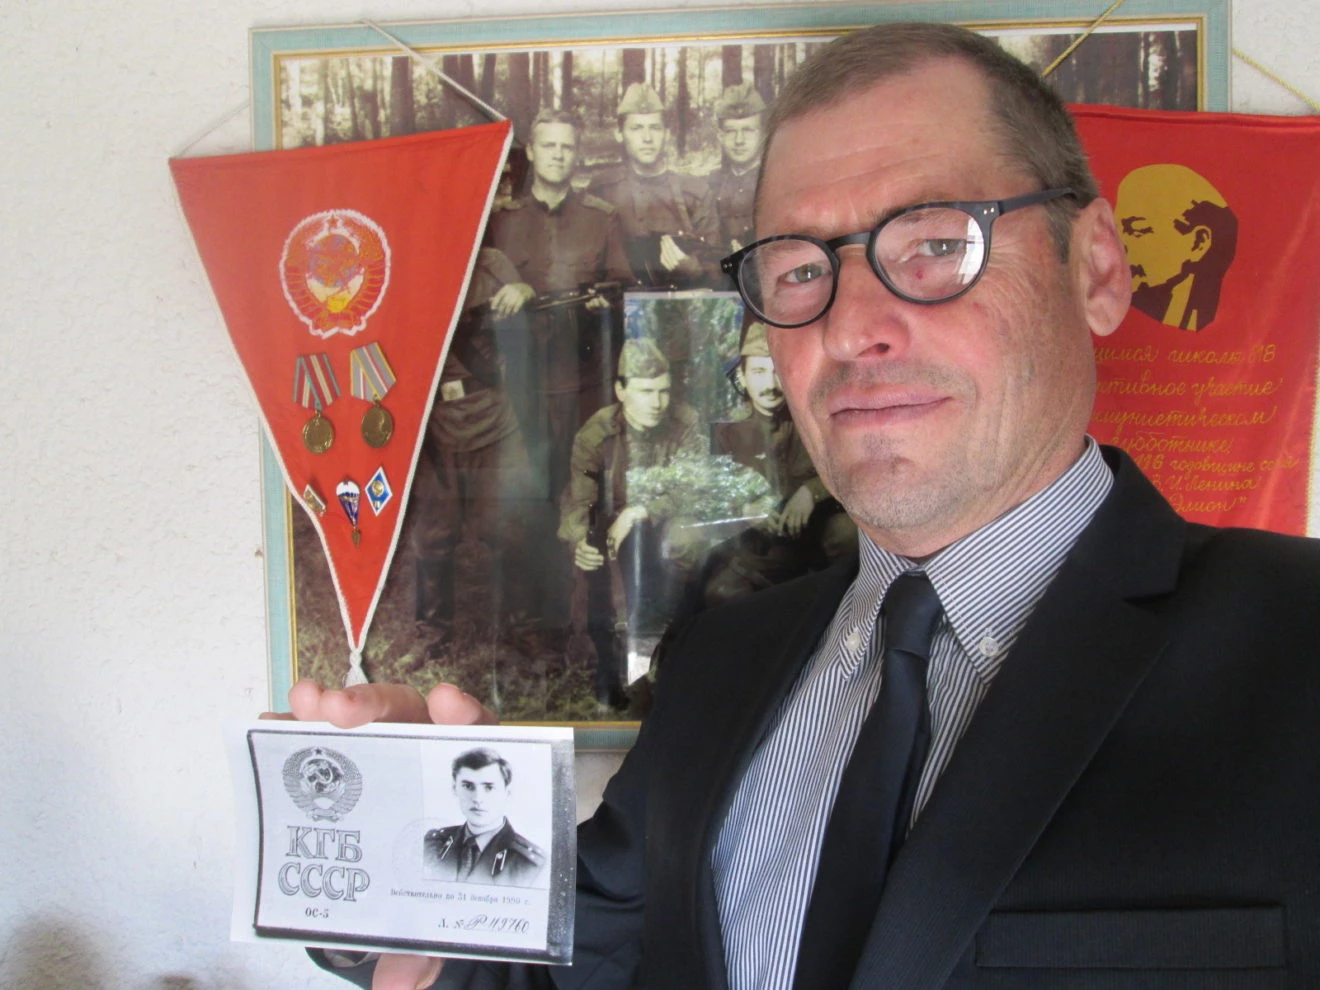 Sergey Zhirnov, a former Soviet KGB illegal who defected and now lives in France (Photo: zimamagazine.com)